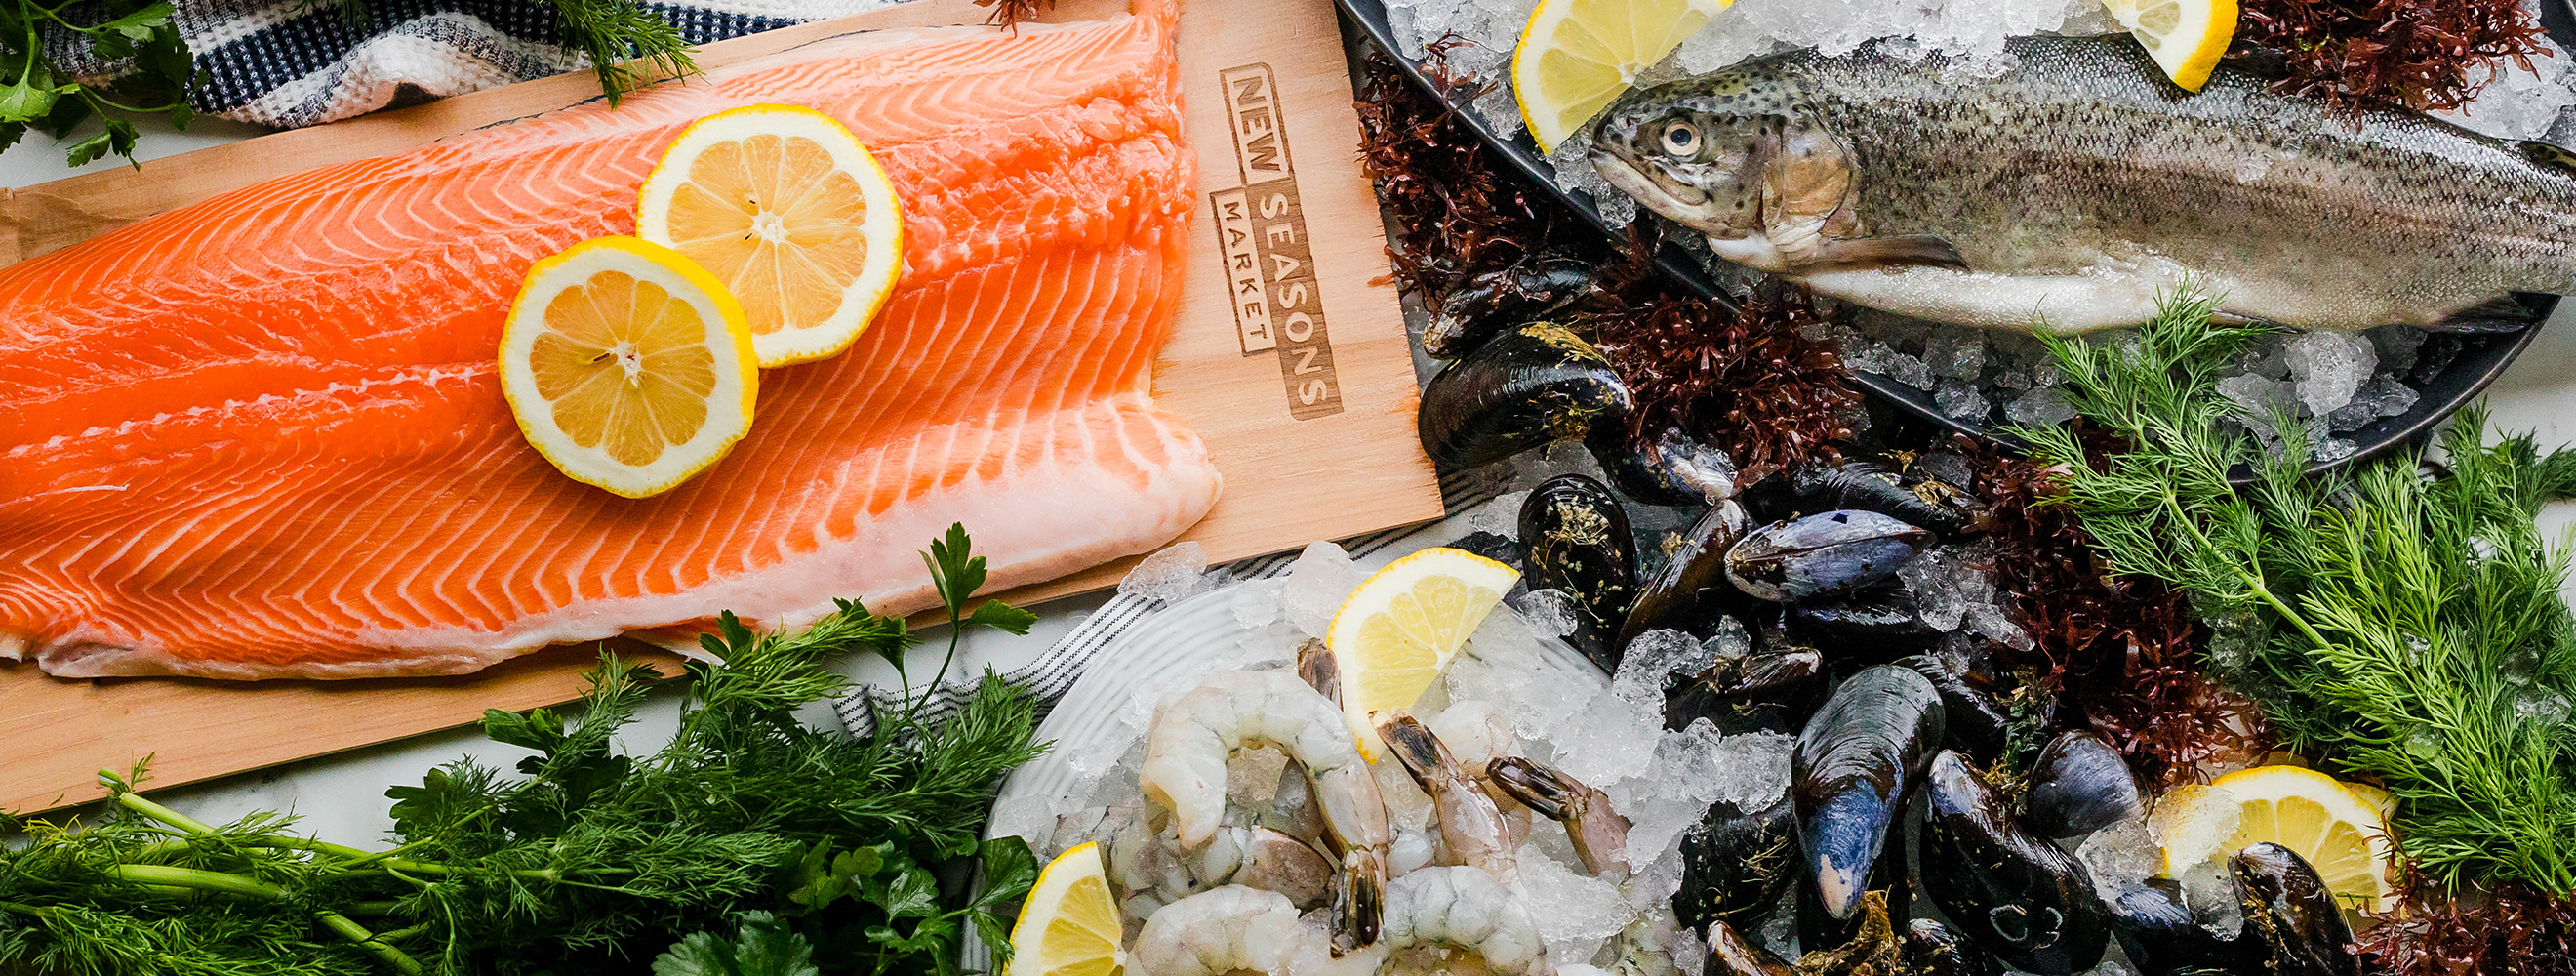 seafood display of salmon filet with lemon slices, shrimp and mussels.